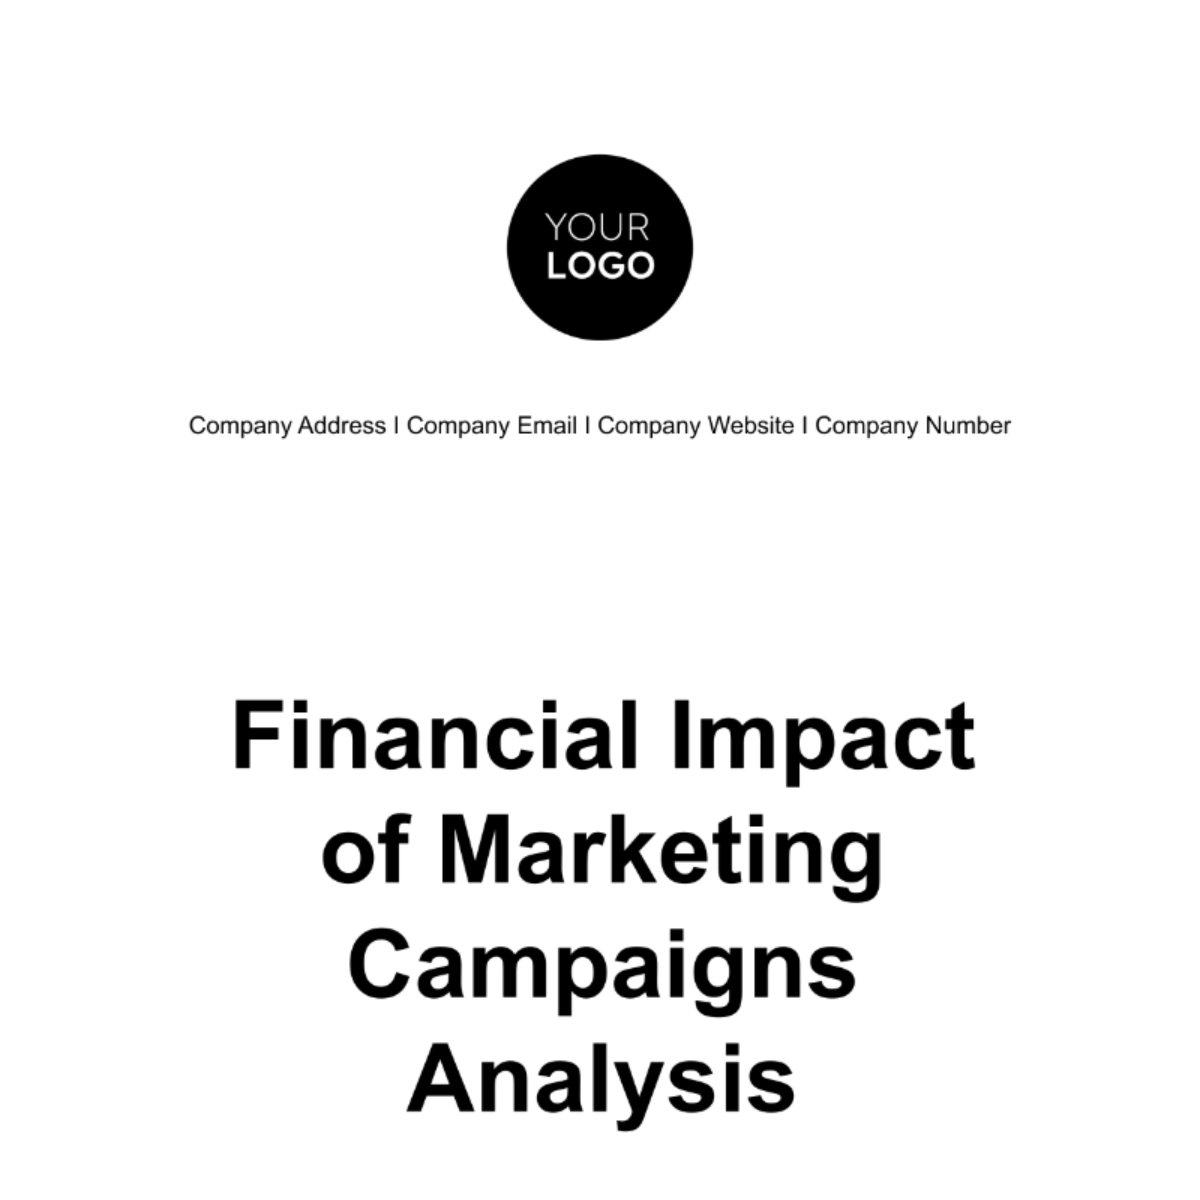 Financial Impact of Marketing Campaigns Analysis Template